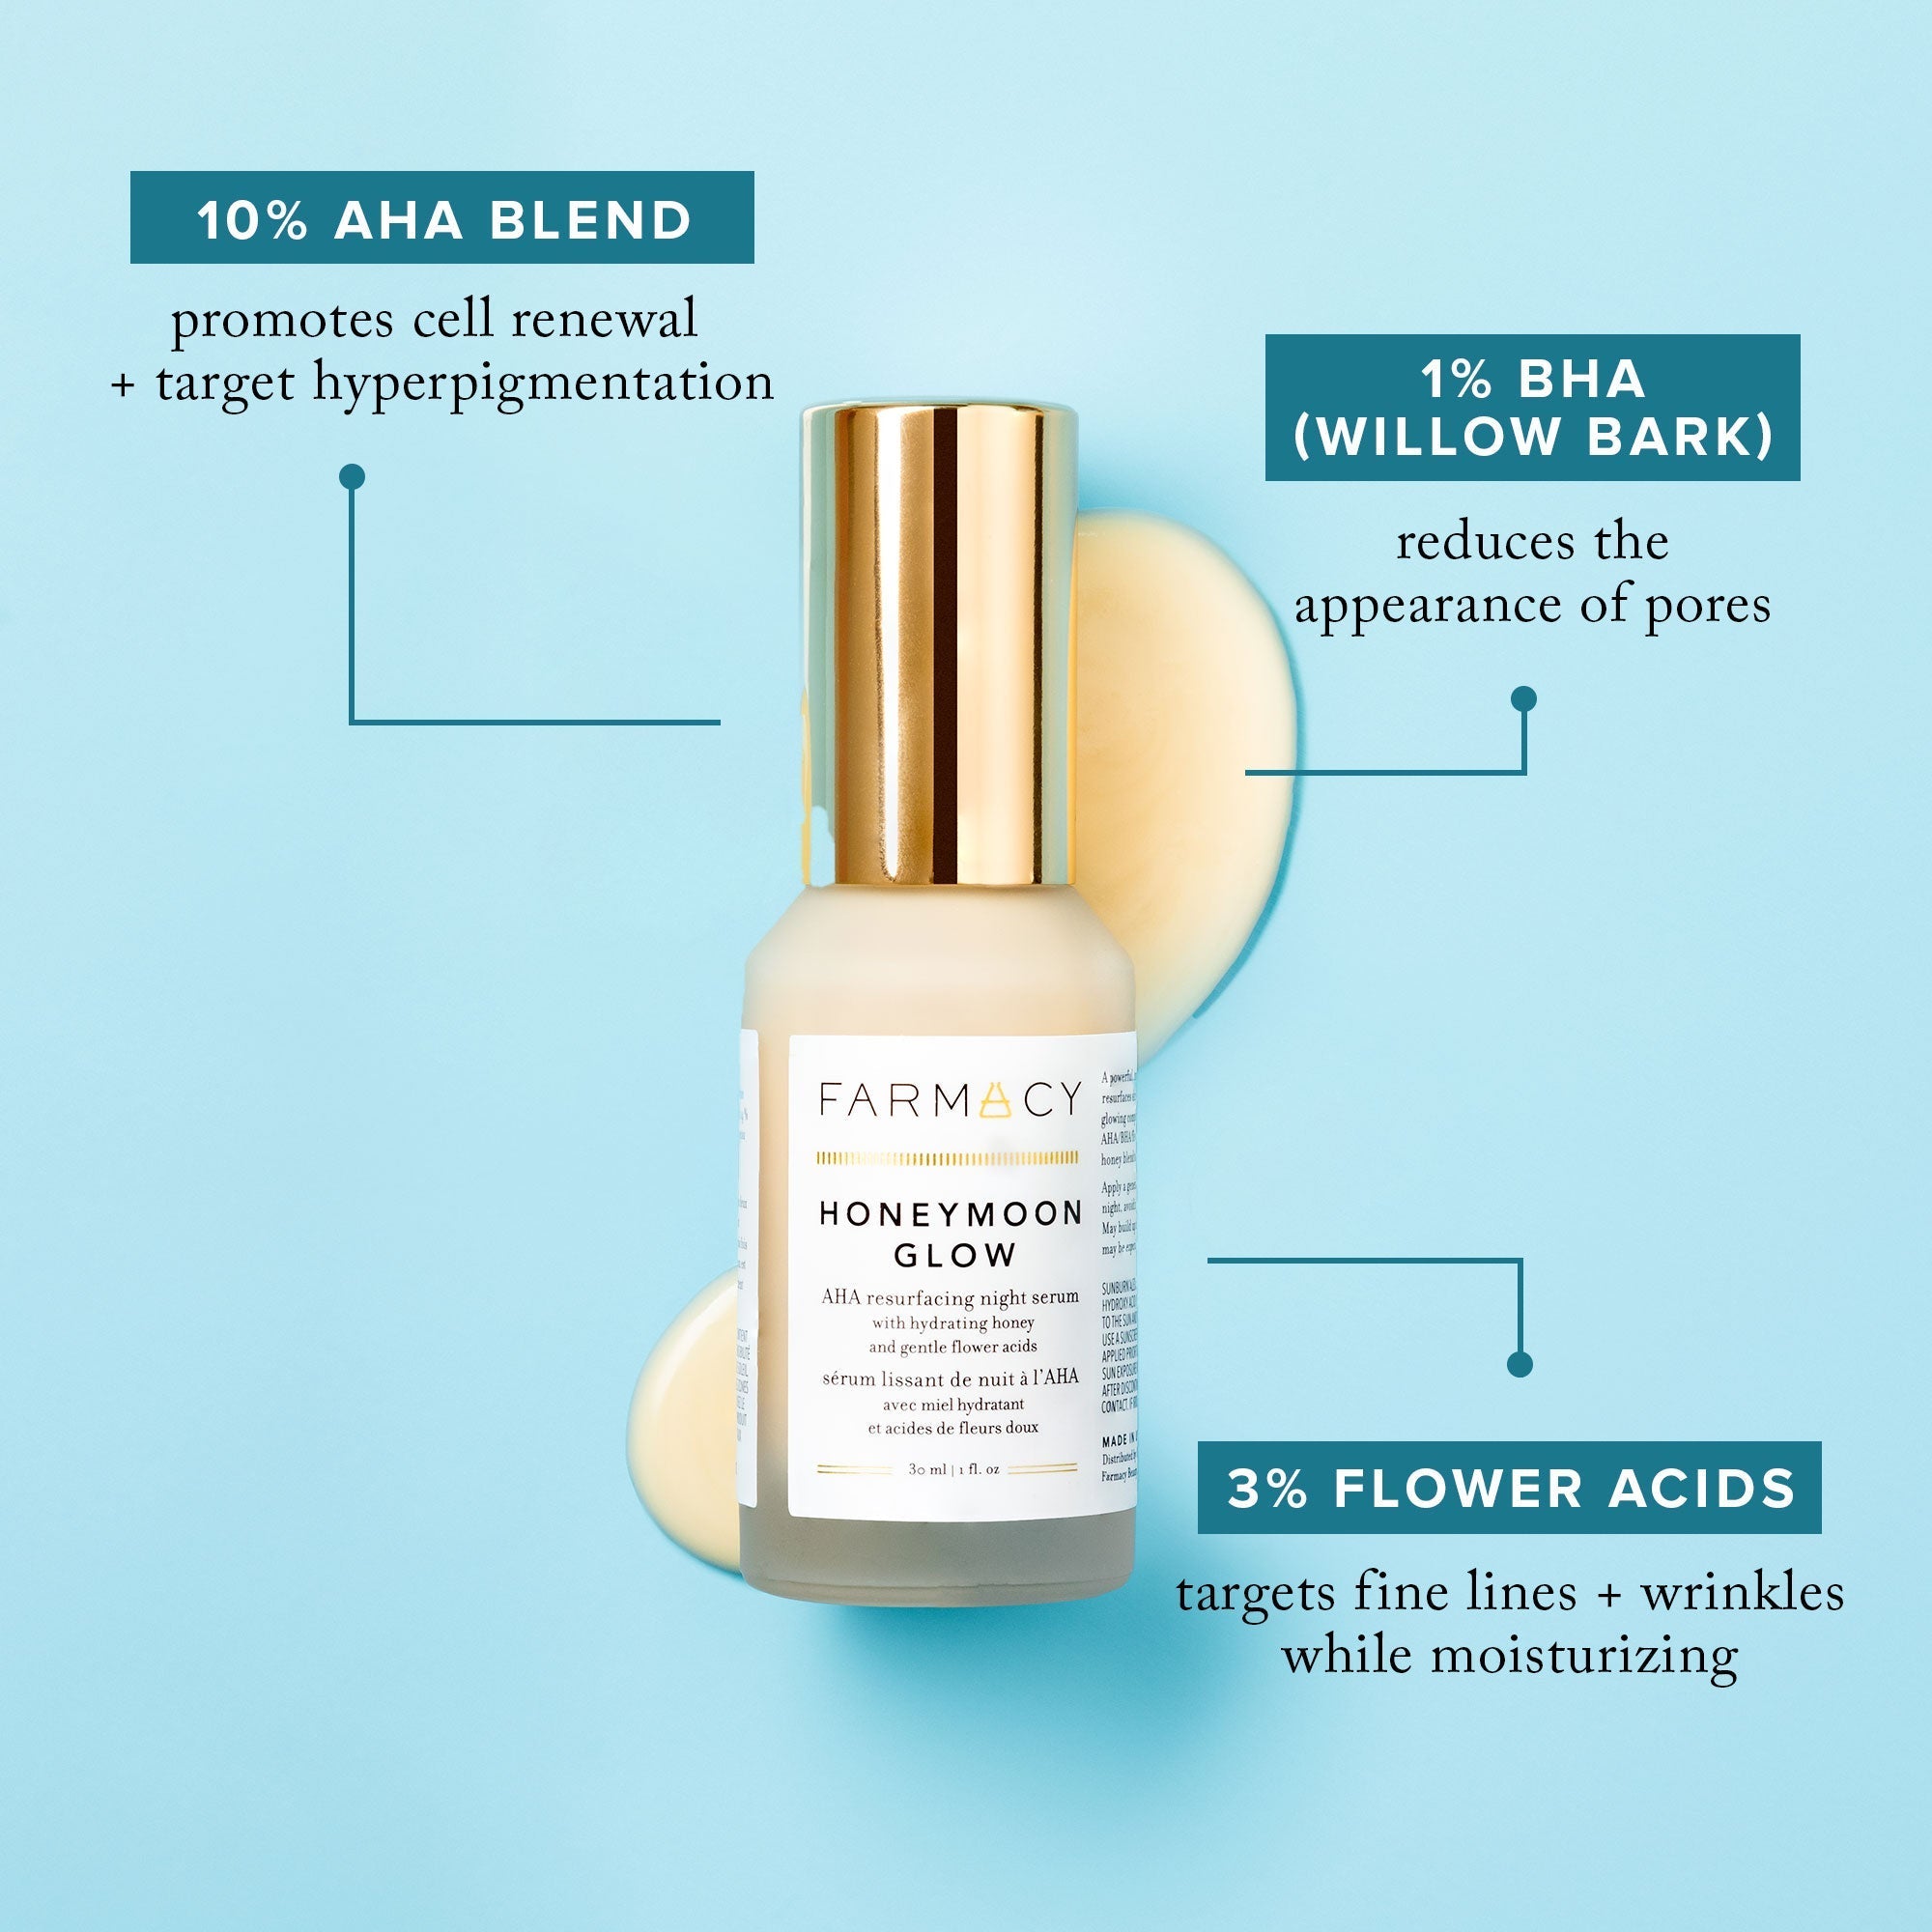 A Honeymoon Glow infographic outlining its skincare benefits